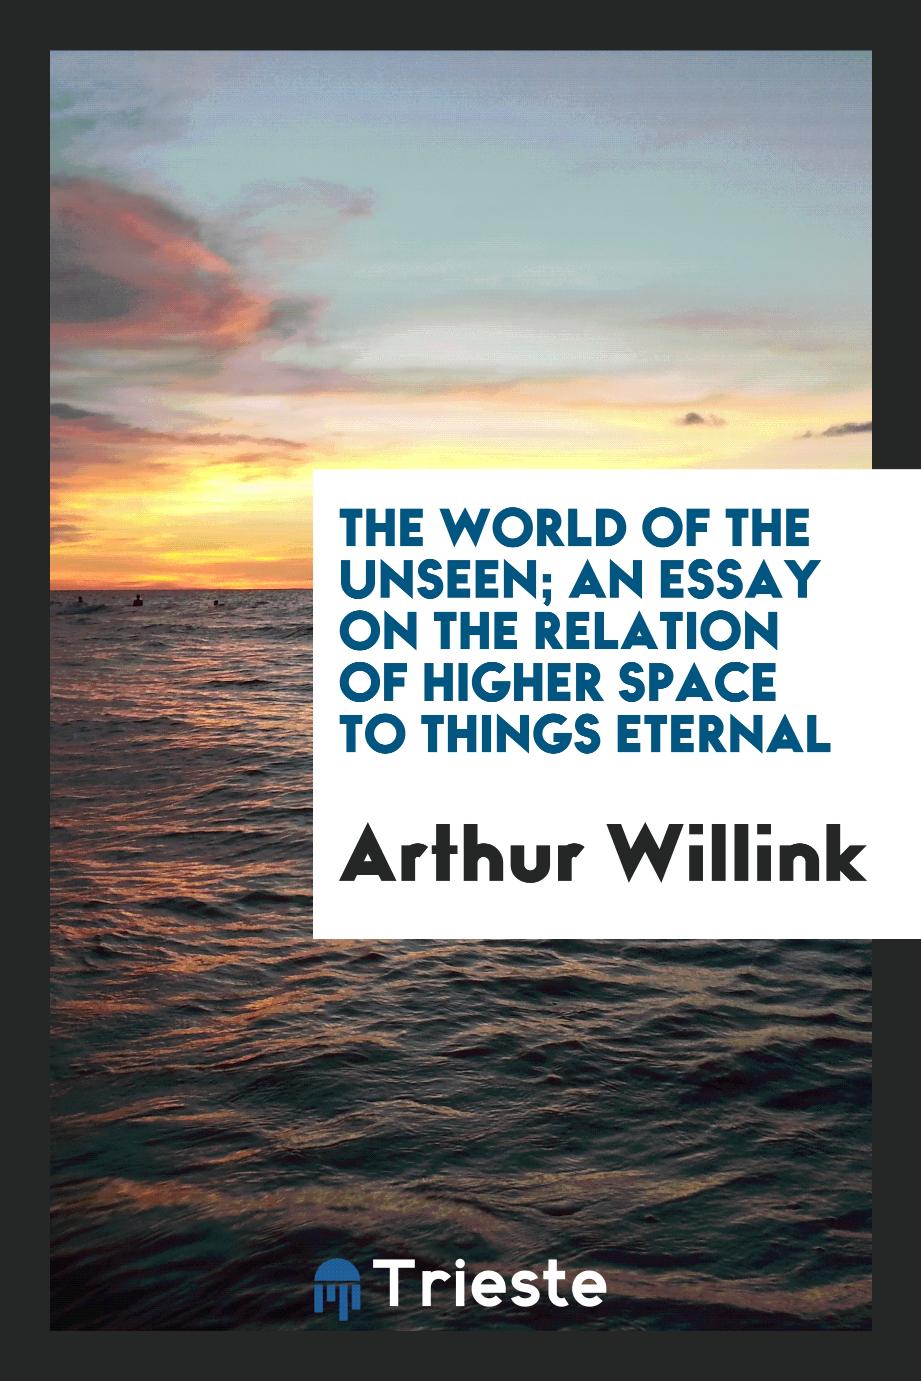 The world of the unseen; an essay on the relation of higher space to things eternal